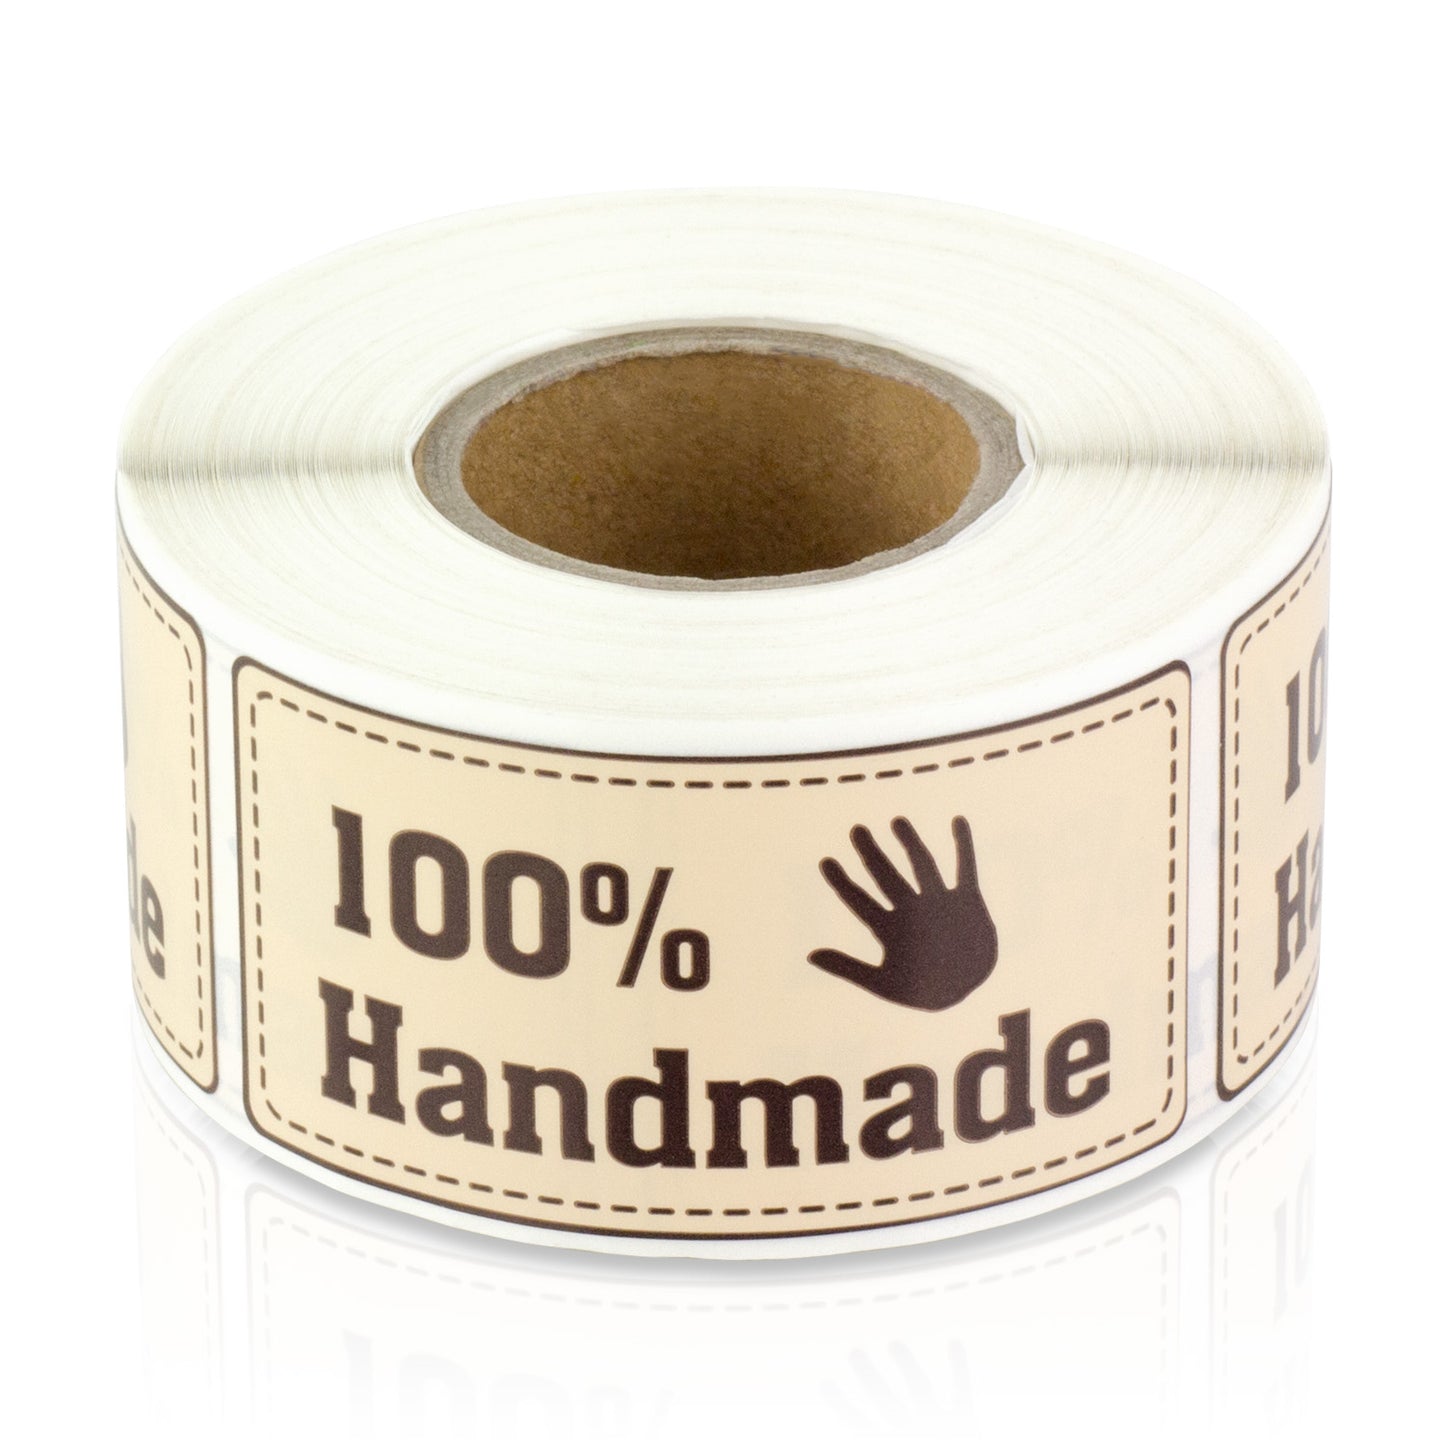 2 inch | Food Labeling: Retail & Sales: Handmade Product Stickers